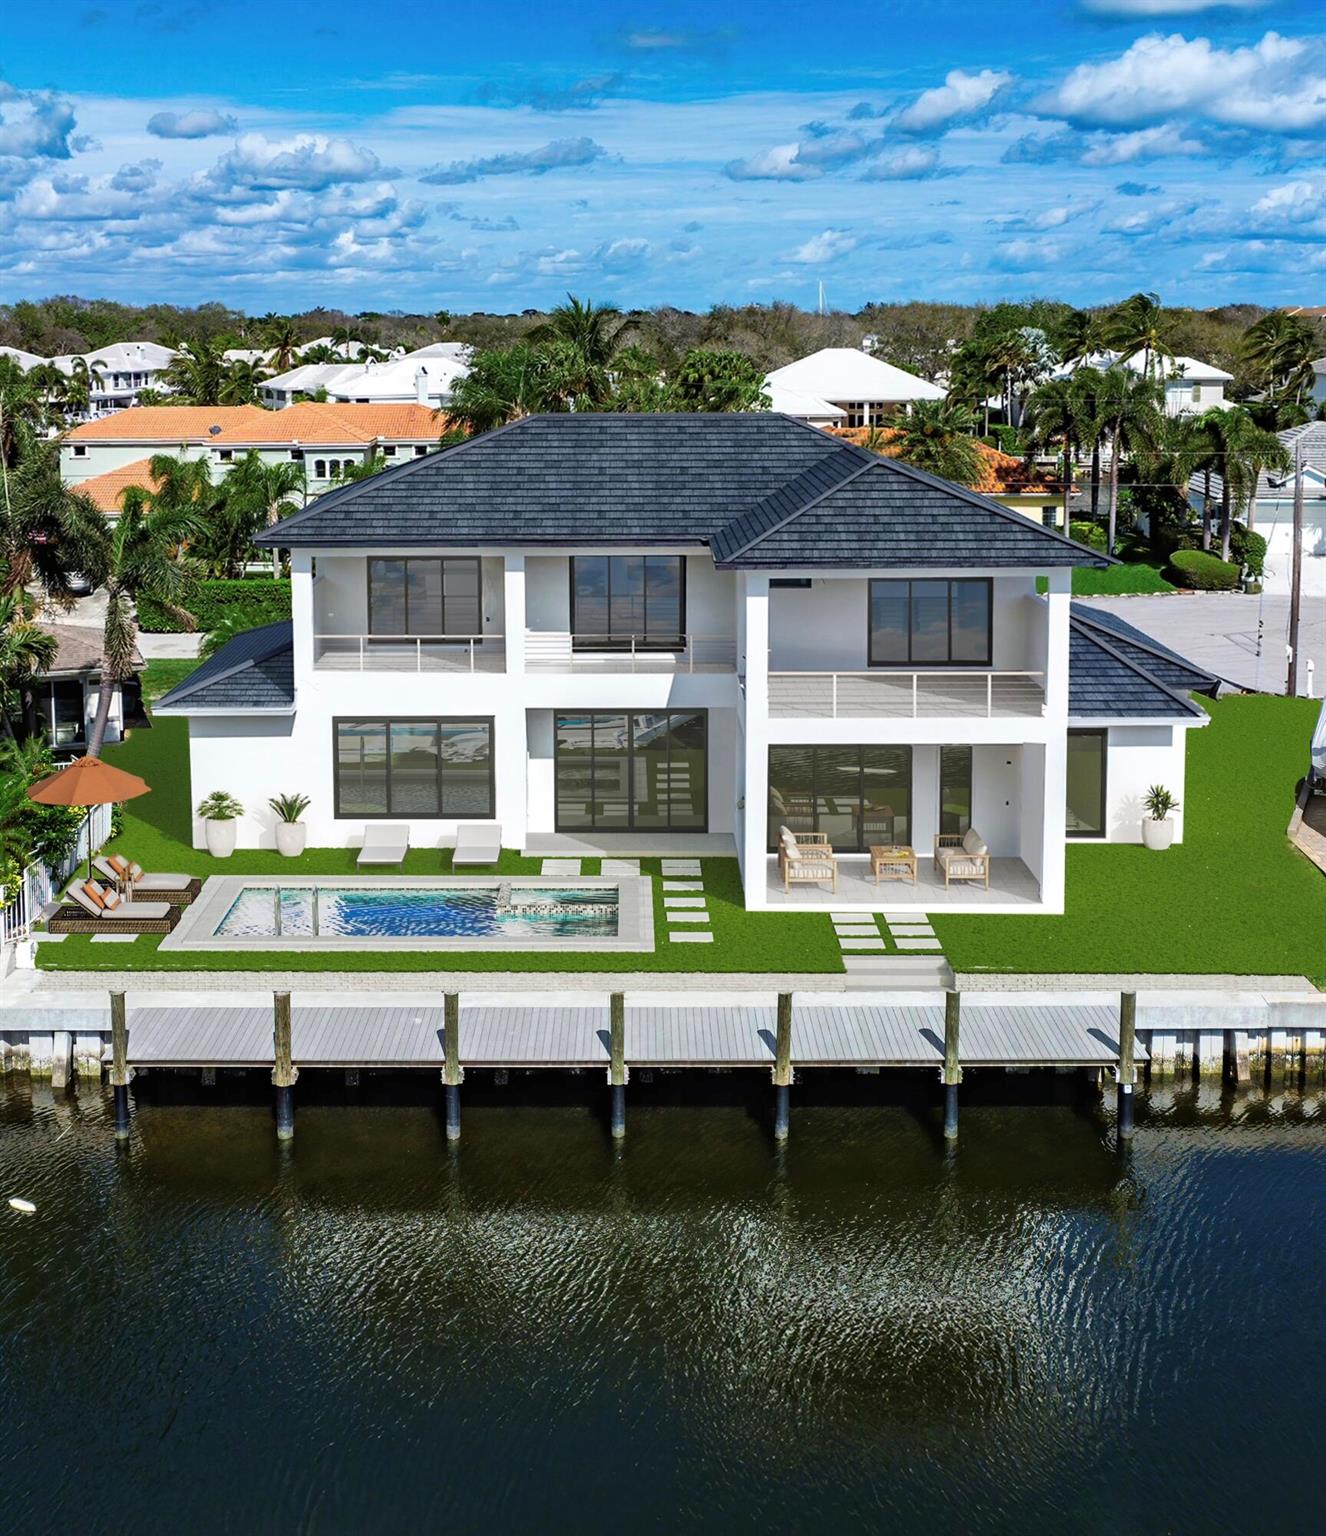 Your dream home on the water is coming soon!!! A rare opportunity for all new construction on the water in the heart of Palm Beach Gardens. This stunning 5 bedroom, 8 bathroom Smart home has all the upgrades and a modern open floor plan. The second floor has an open living space with water views a wet bar that makes a great family room, and all the upstairs bedrooms have generous balconies for beautiful views.  This property has a newer dock and seawall, no fixed bridges and is seconds from the intracoastal waterway making it a boaters dream! The gorgeous modern pool features an integrated overflow jacuzzi and overlooks the waterway. This stunning home is on a quiet cul de sac with no HOA  in the heart of highly desirable Palm Beach Gardens.  It also boasts a 3 car garage, a whole house propane generator and impact glass throughout. Did I mention the 10 foot sliders and gorgeous water views throughout?! Peace and tranquility on the water in the heart of it all. Who says you cant have it all? Dont wait to see this home as its not going to last long.